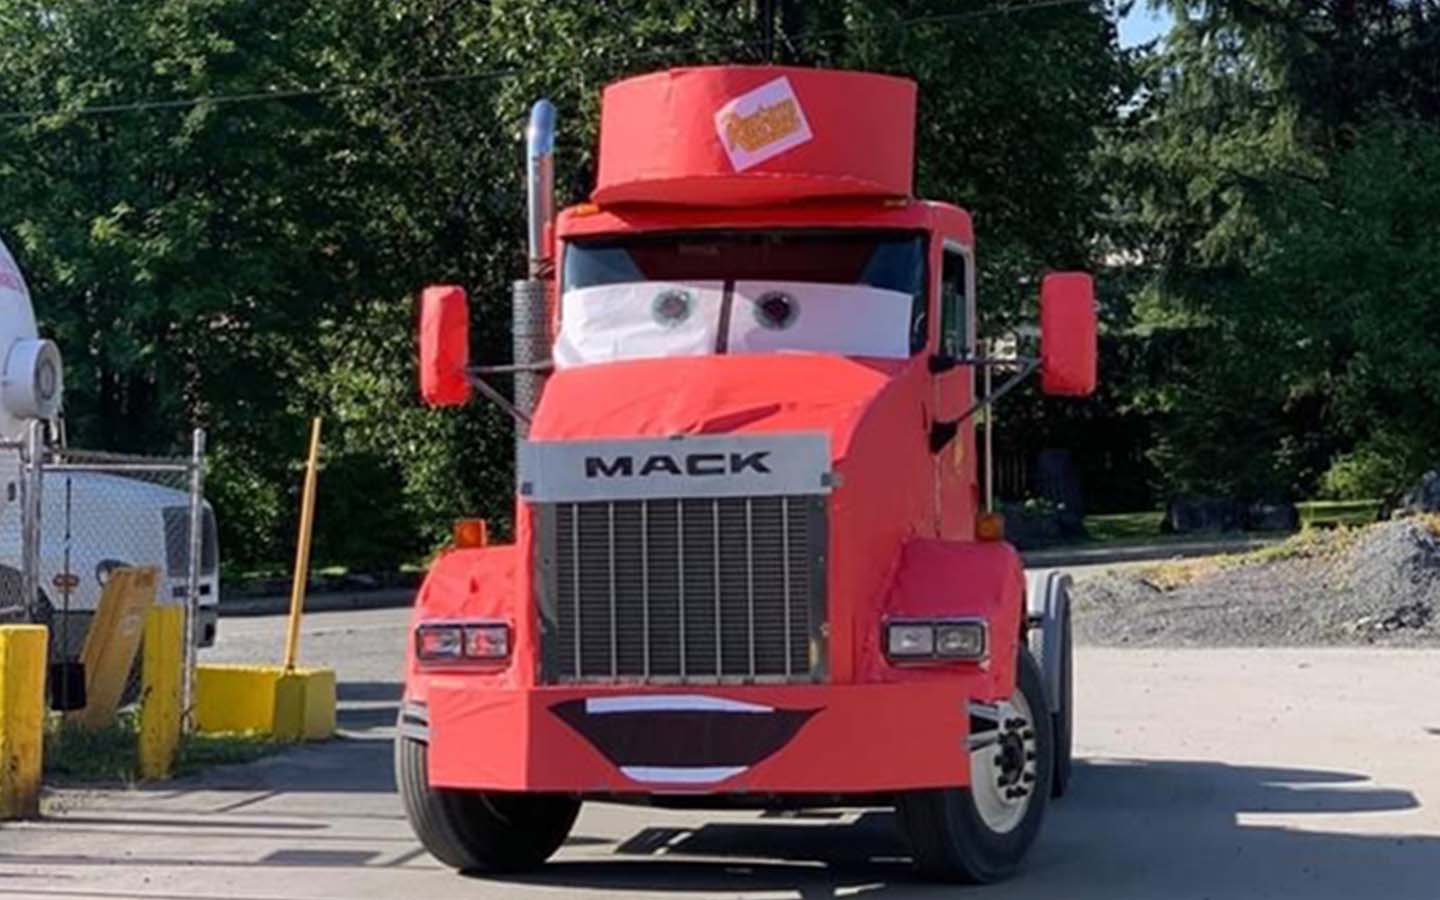 Truck disguised as Cars character for special delivery